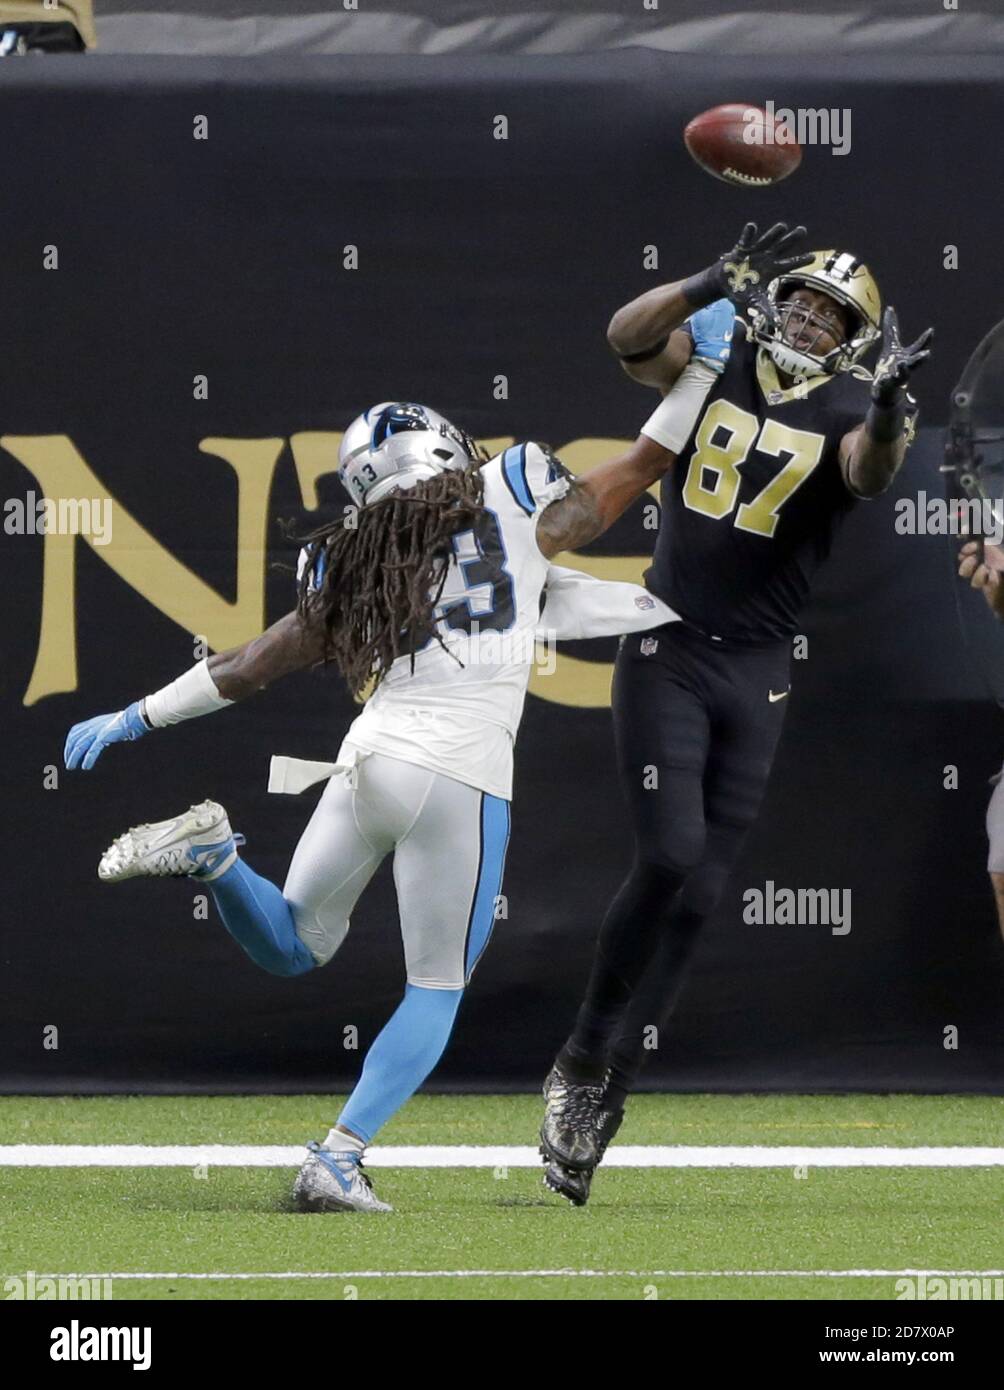 New Orleans, United States. 25th Oct, 2020. New Orleans Saints tight end Jared Cook (87) catches a touchdown pass as Carolina Panthers free safety Tre Boston (33) defends at the Louisiana Superdome in New Orleans on Monday, October 25, 2020. Photo by AJ Sisco/UPI. Credit: UPI/Alamy Live News Stock Photo